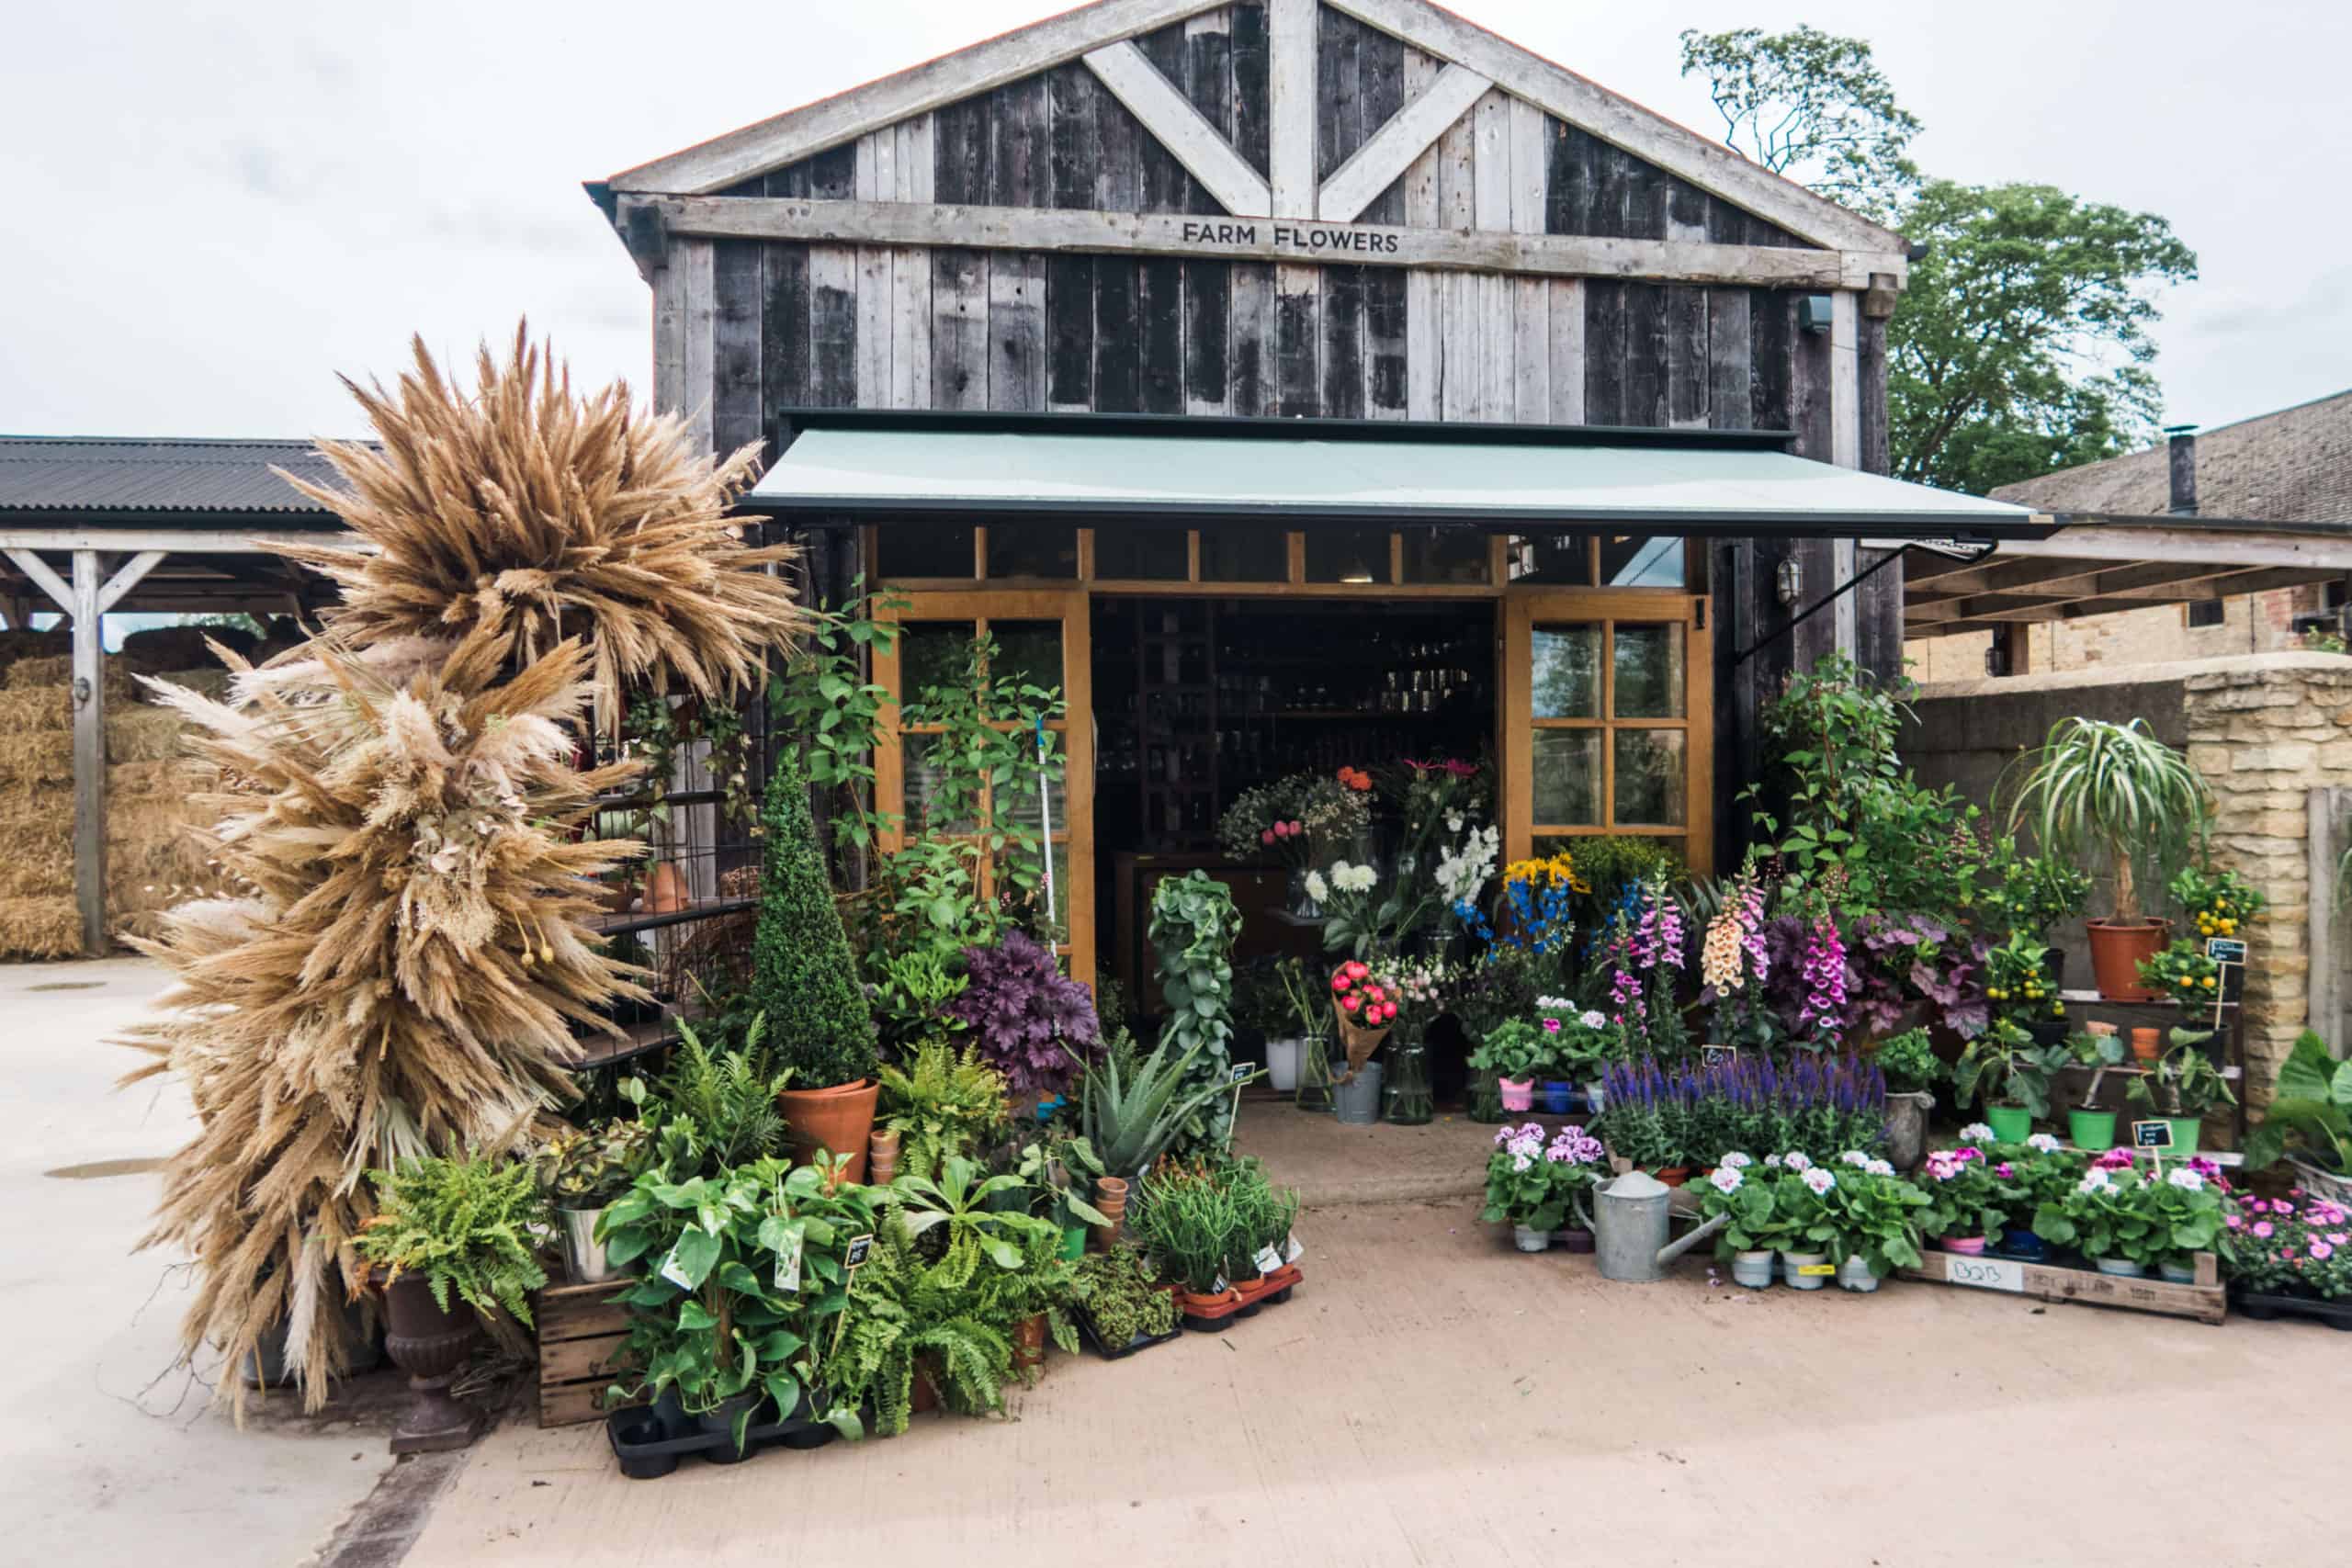 Flower shop at Soho Farmhouse in the English Countryside | The Cotswolds in 20 Photos